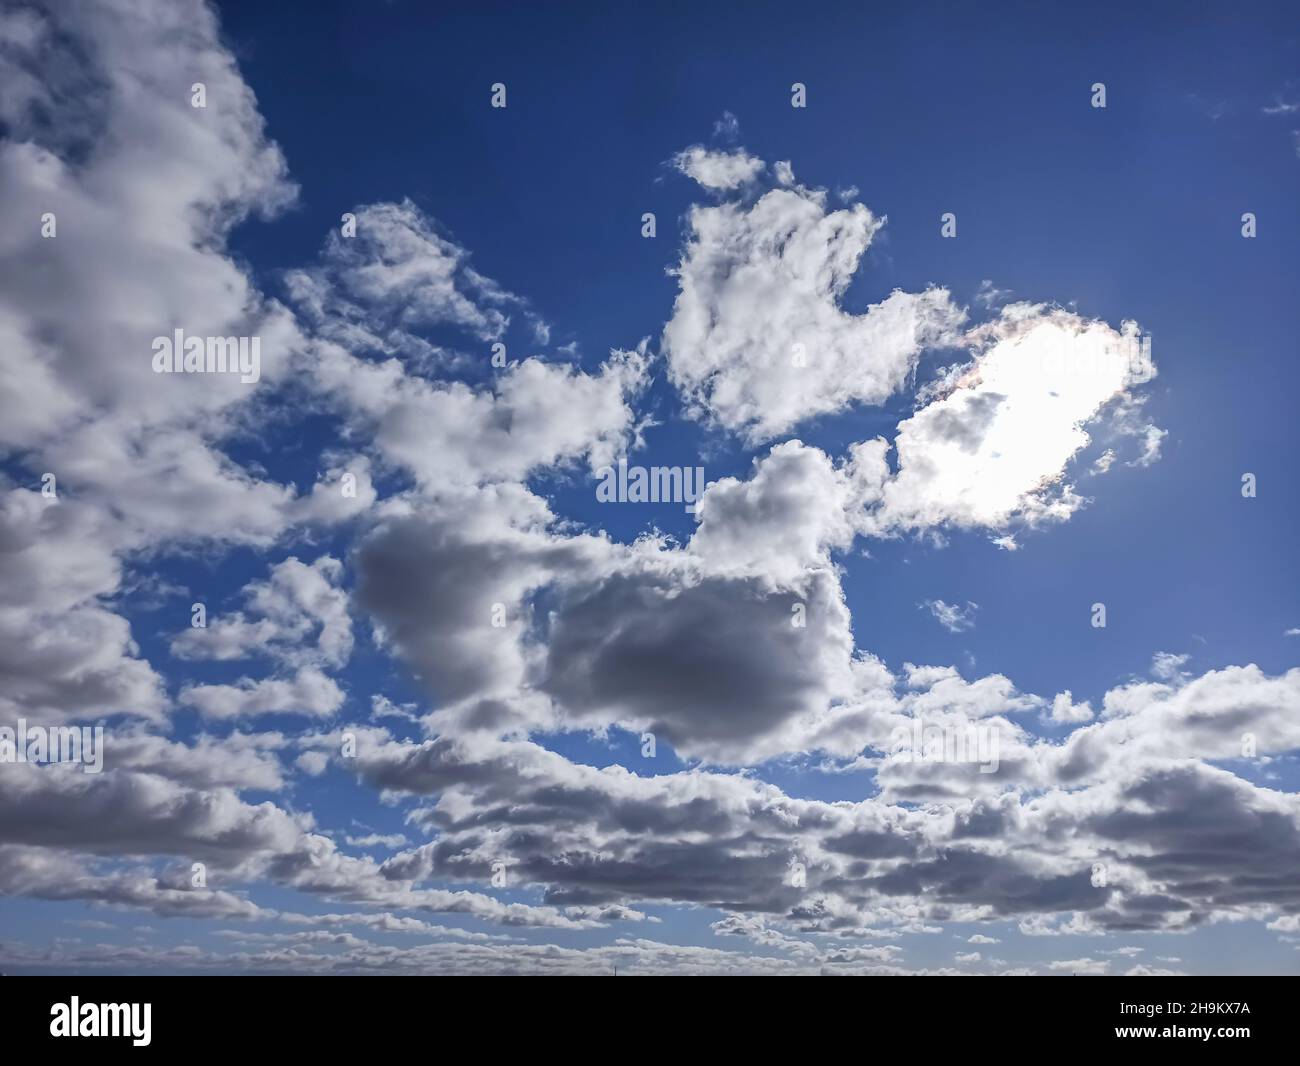 View of a cloudy sky with the sun peeking through the clouds for background Stock Photo